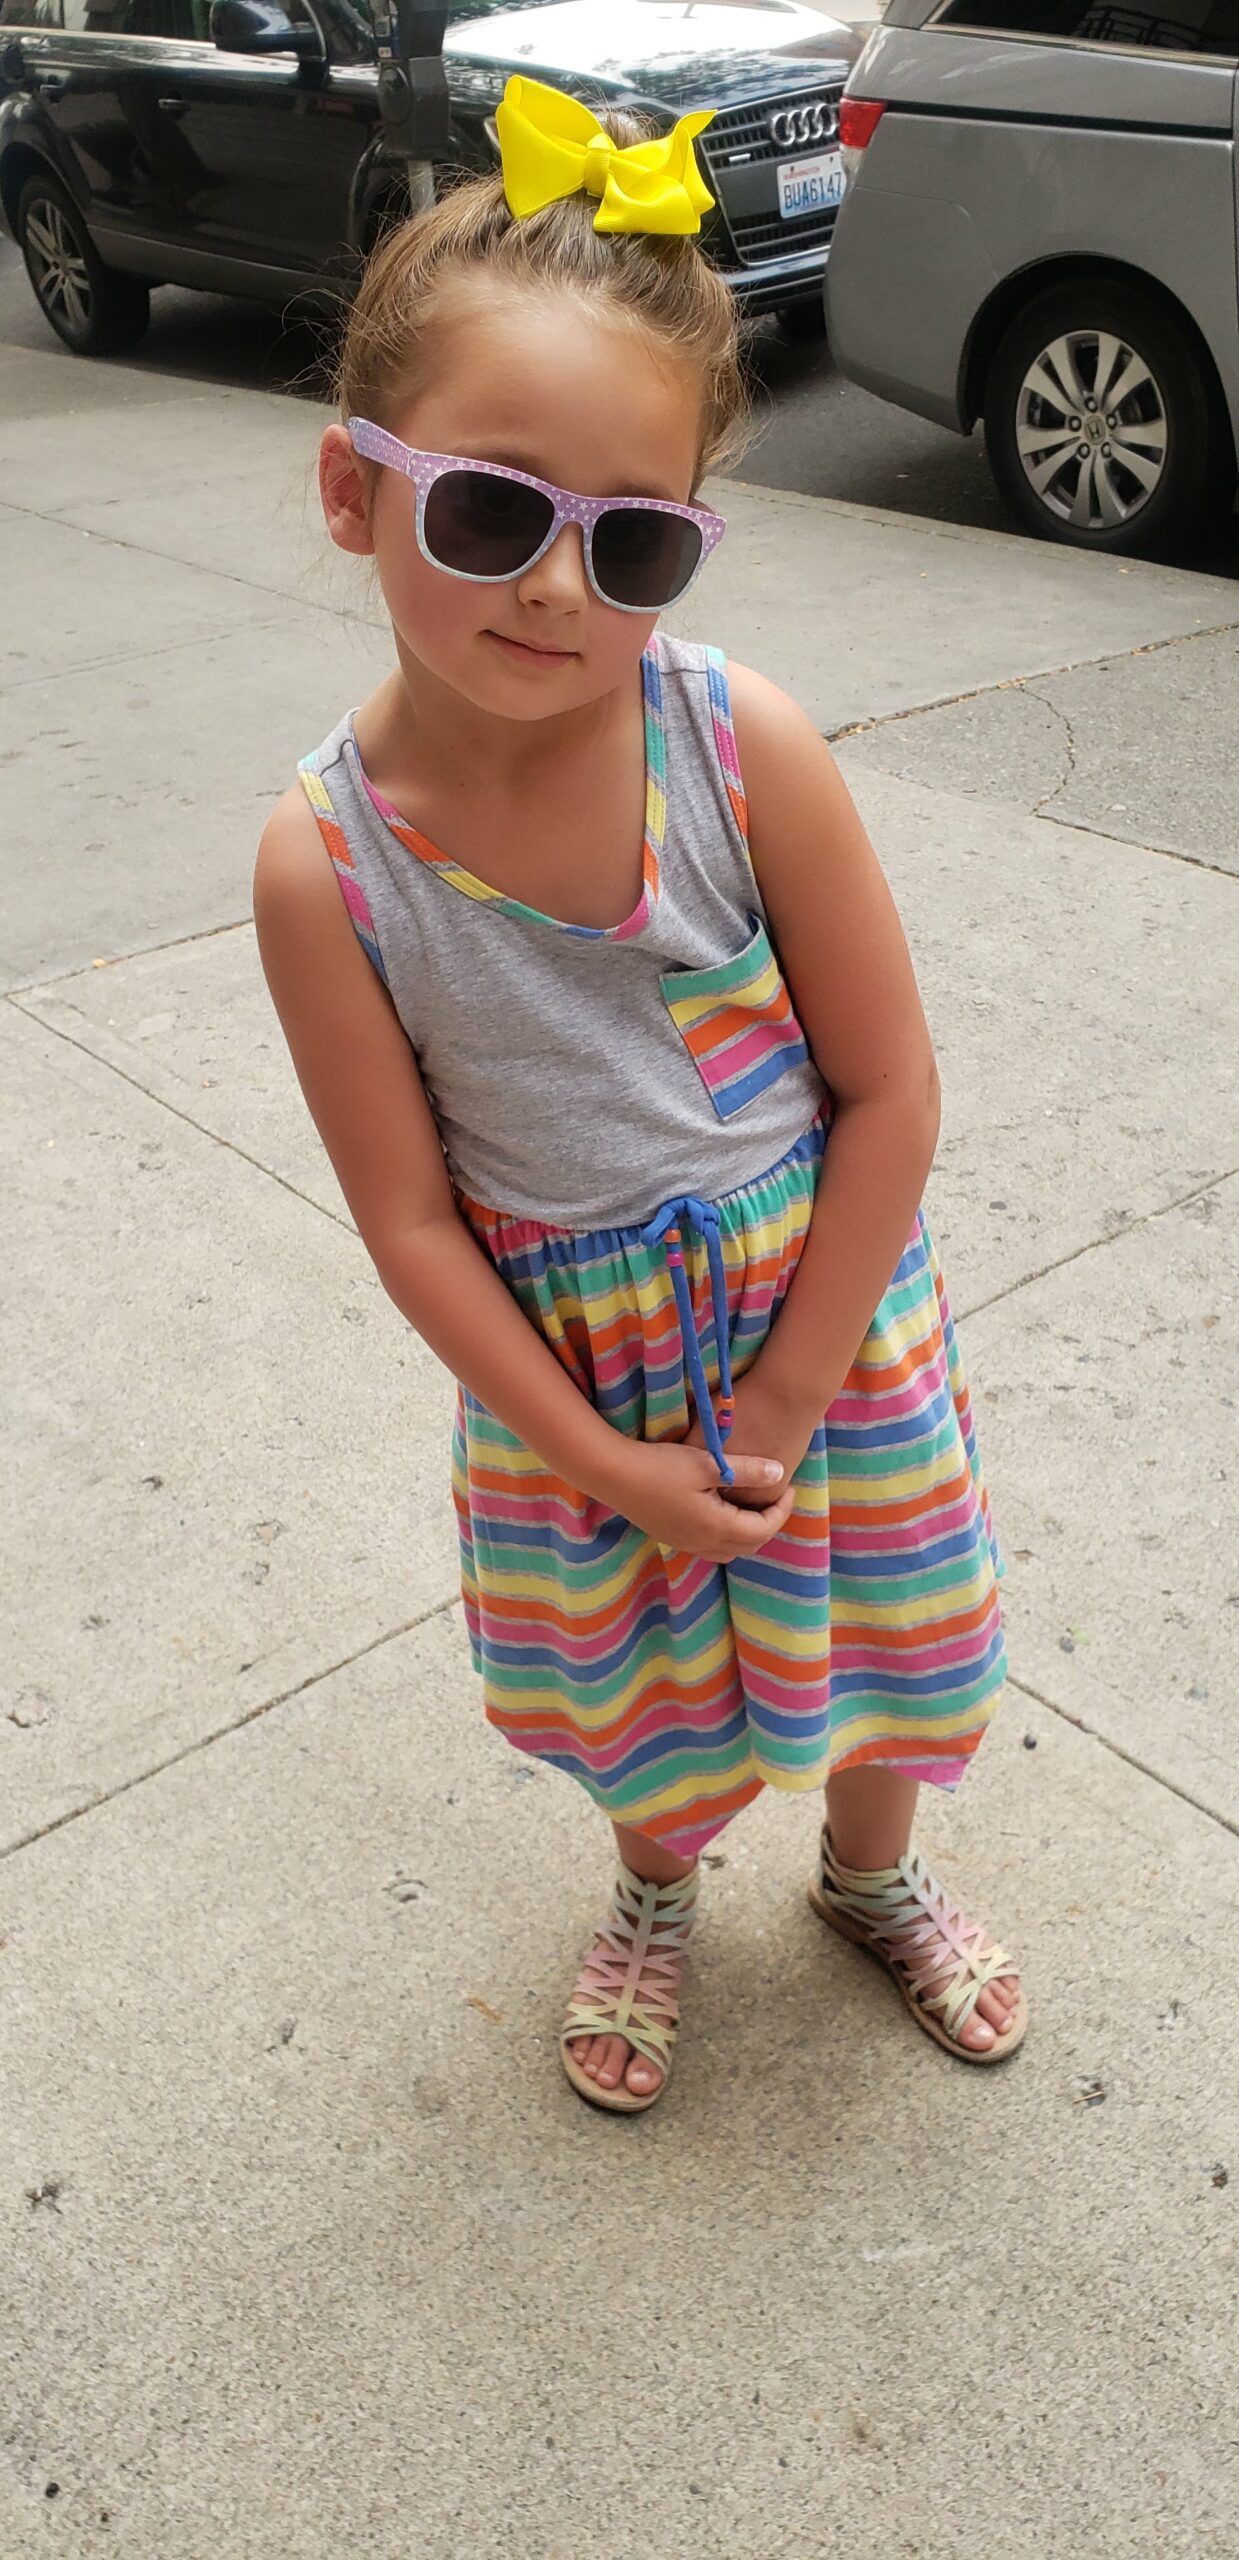 a young girl wearing sunglasses and a colorful striped dress stands confidently with her hands on her hips